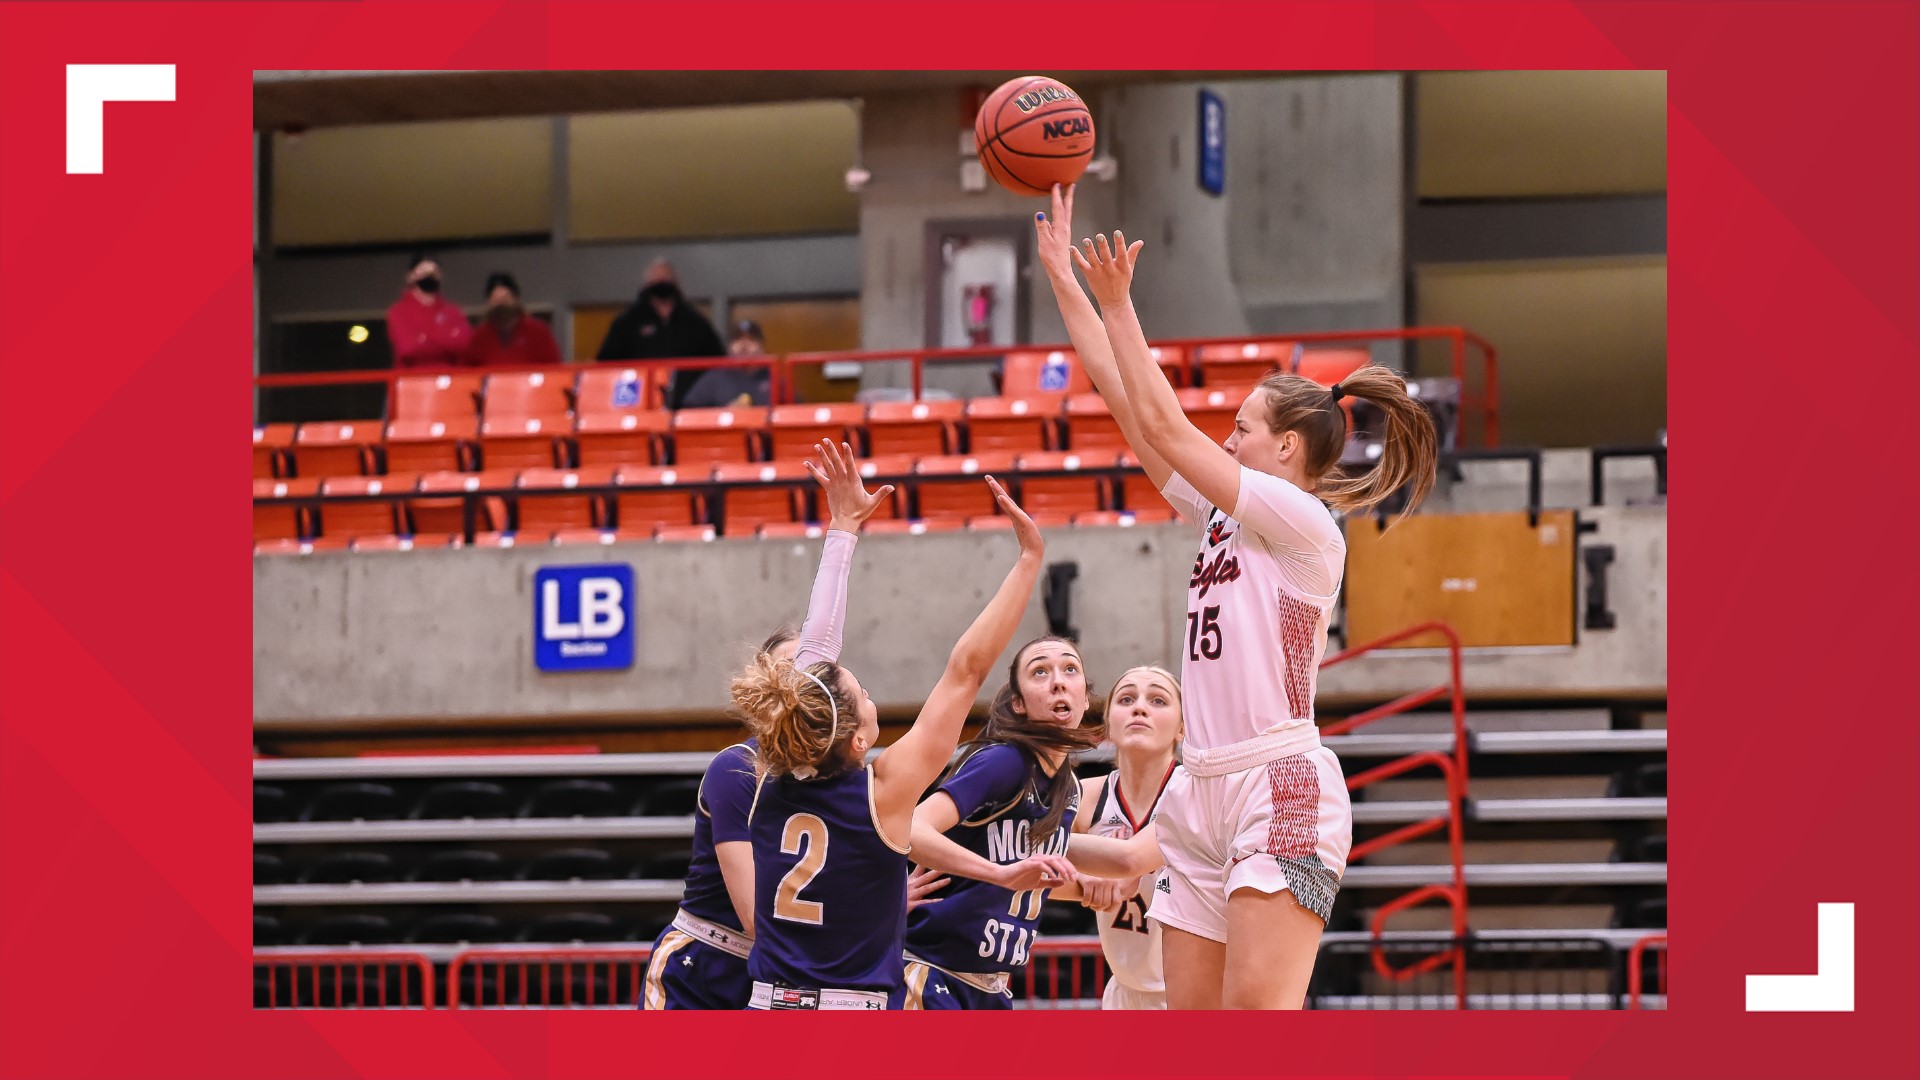 The Spangle native and Liberty High School graduate led the Eags in points per game this season and was second on the team in rebounds.